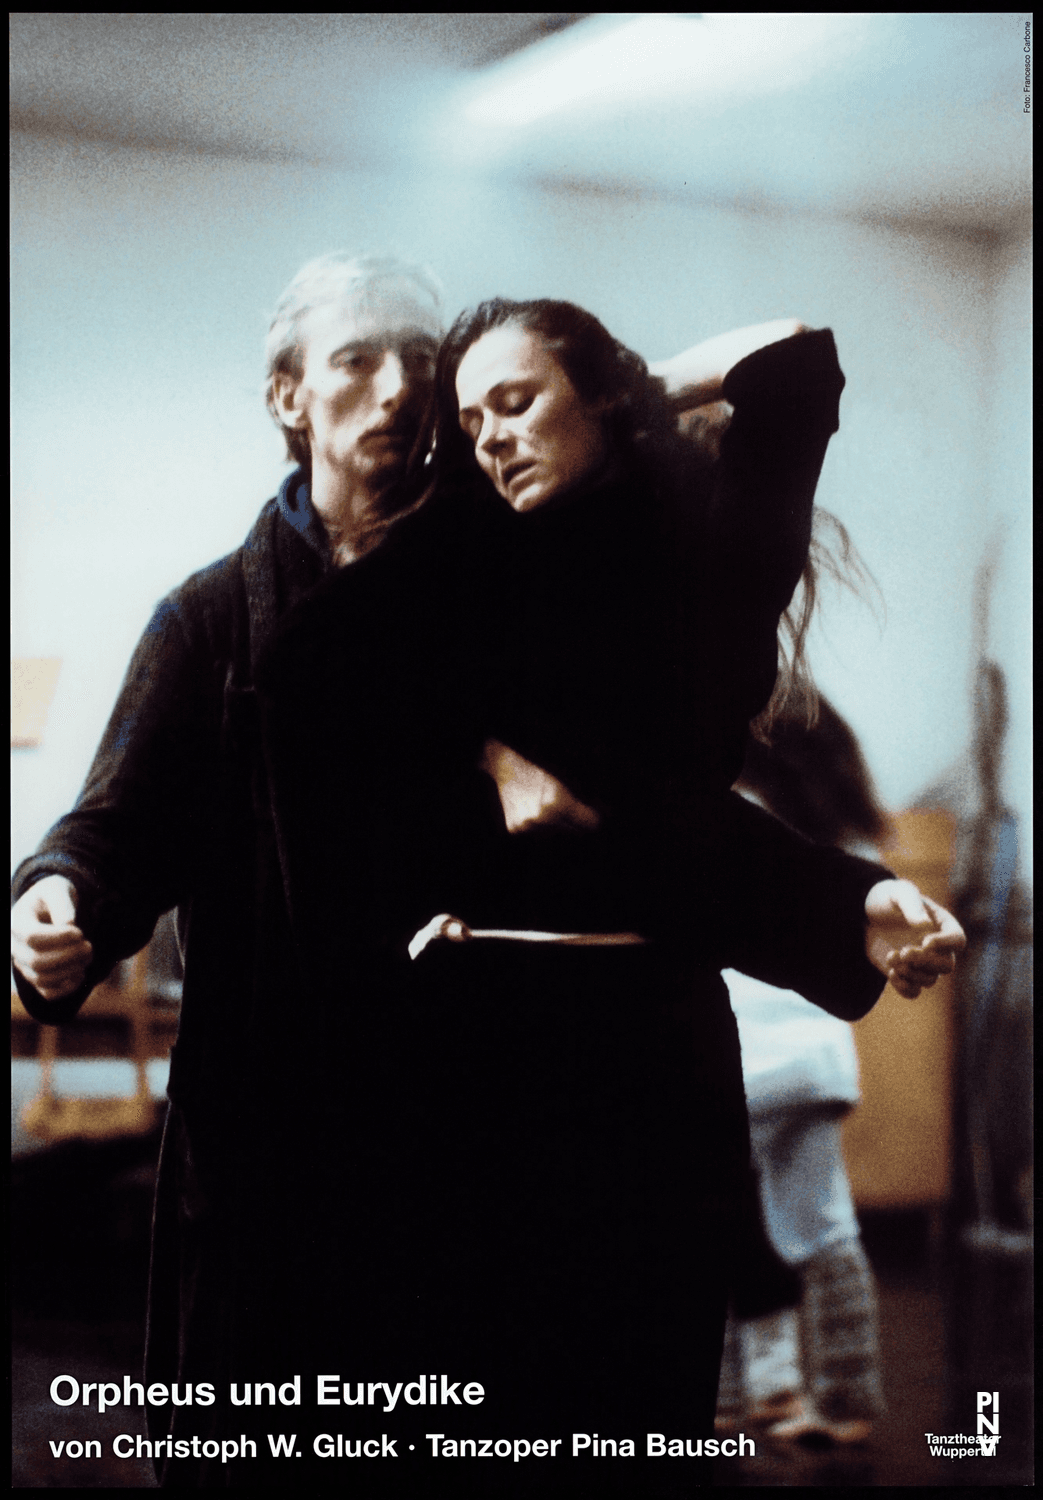 Poster for “Orpheus und Eurydike” by Pina Bausch